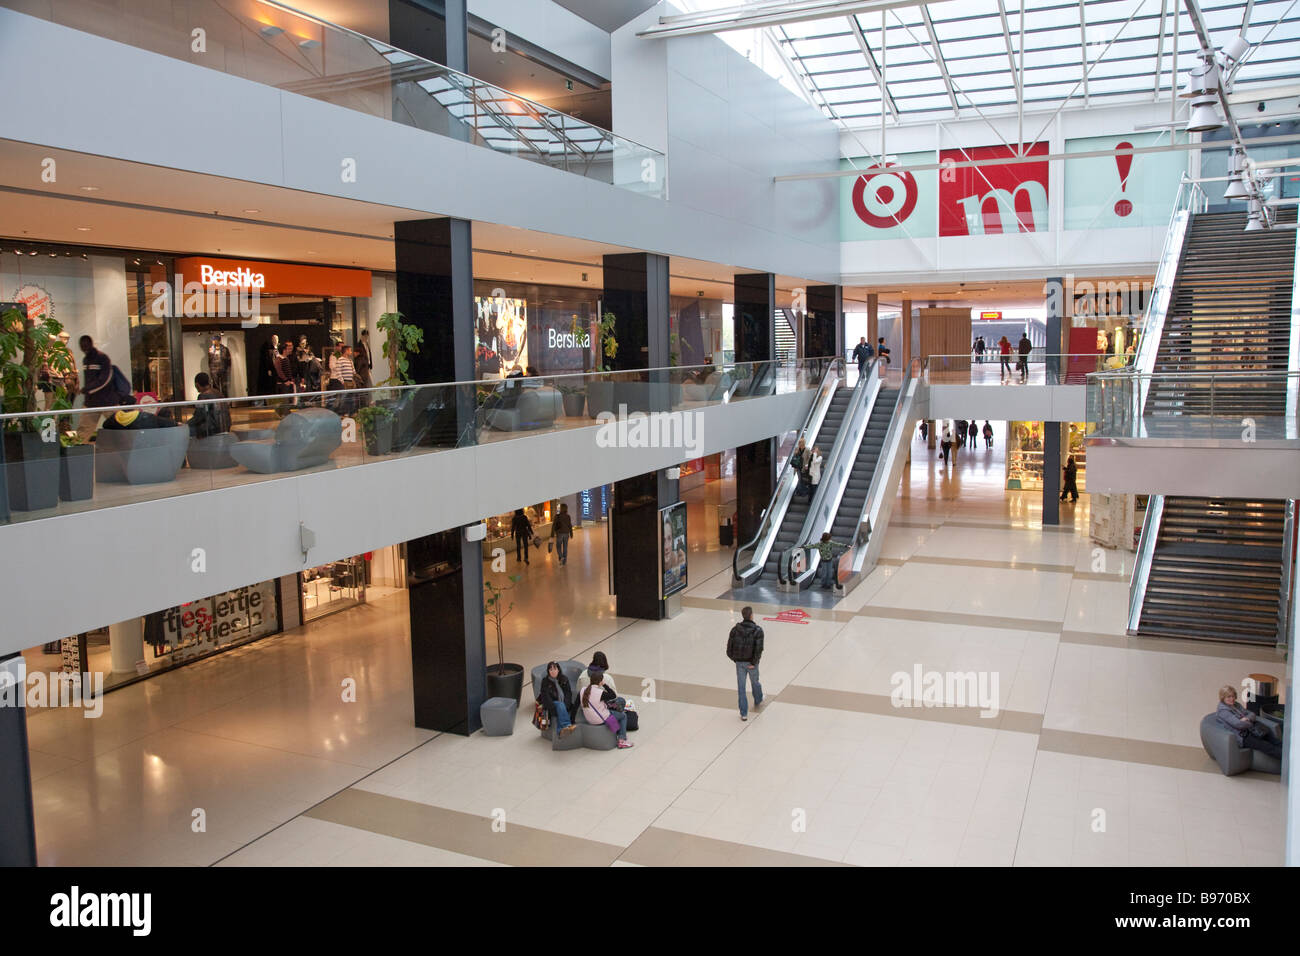 Shopping mall barcelona High Resolution Stock Photography and Images - Alamy